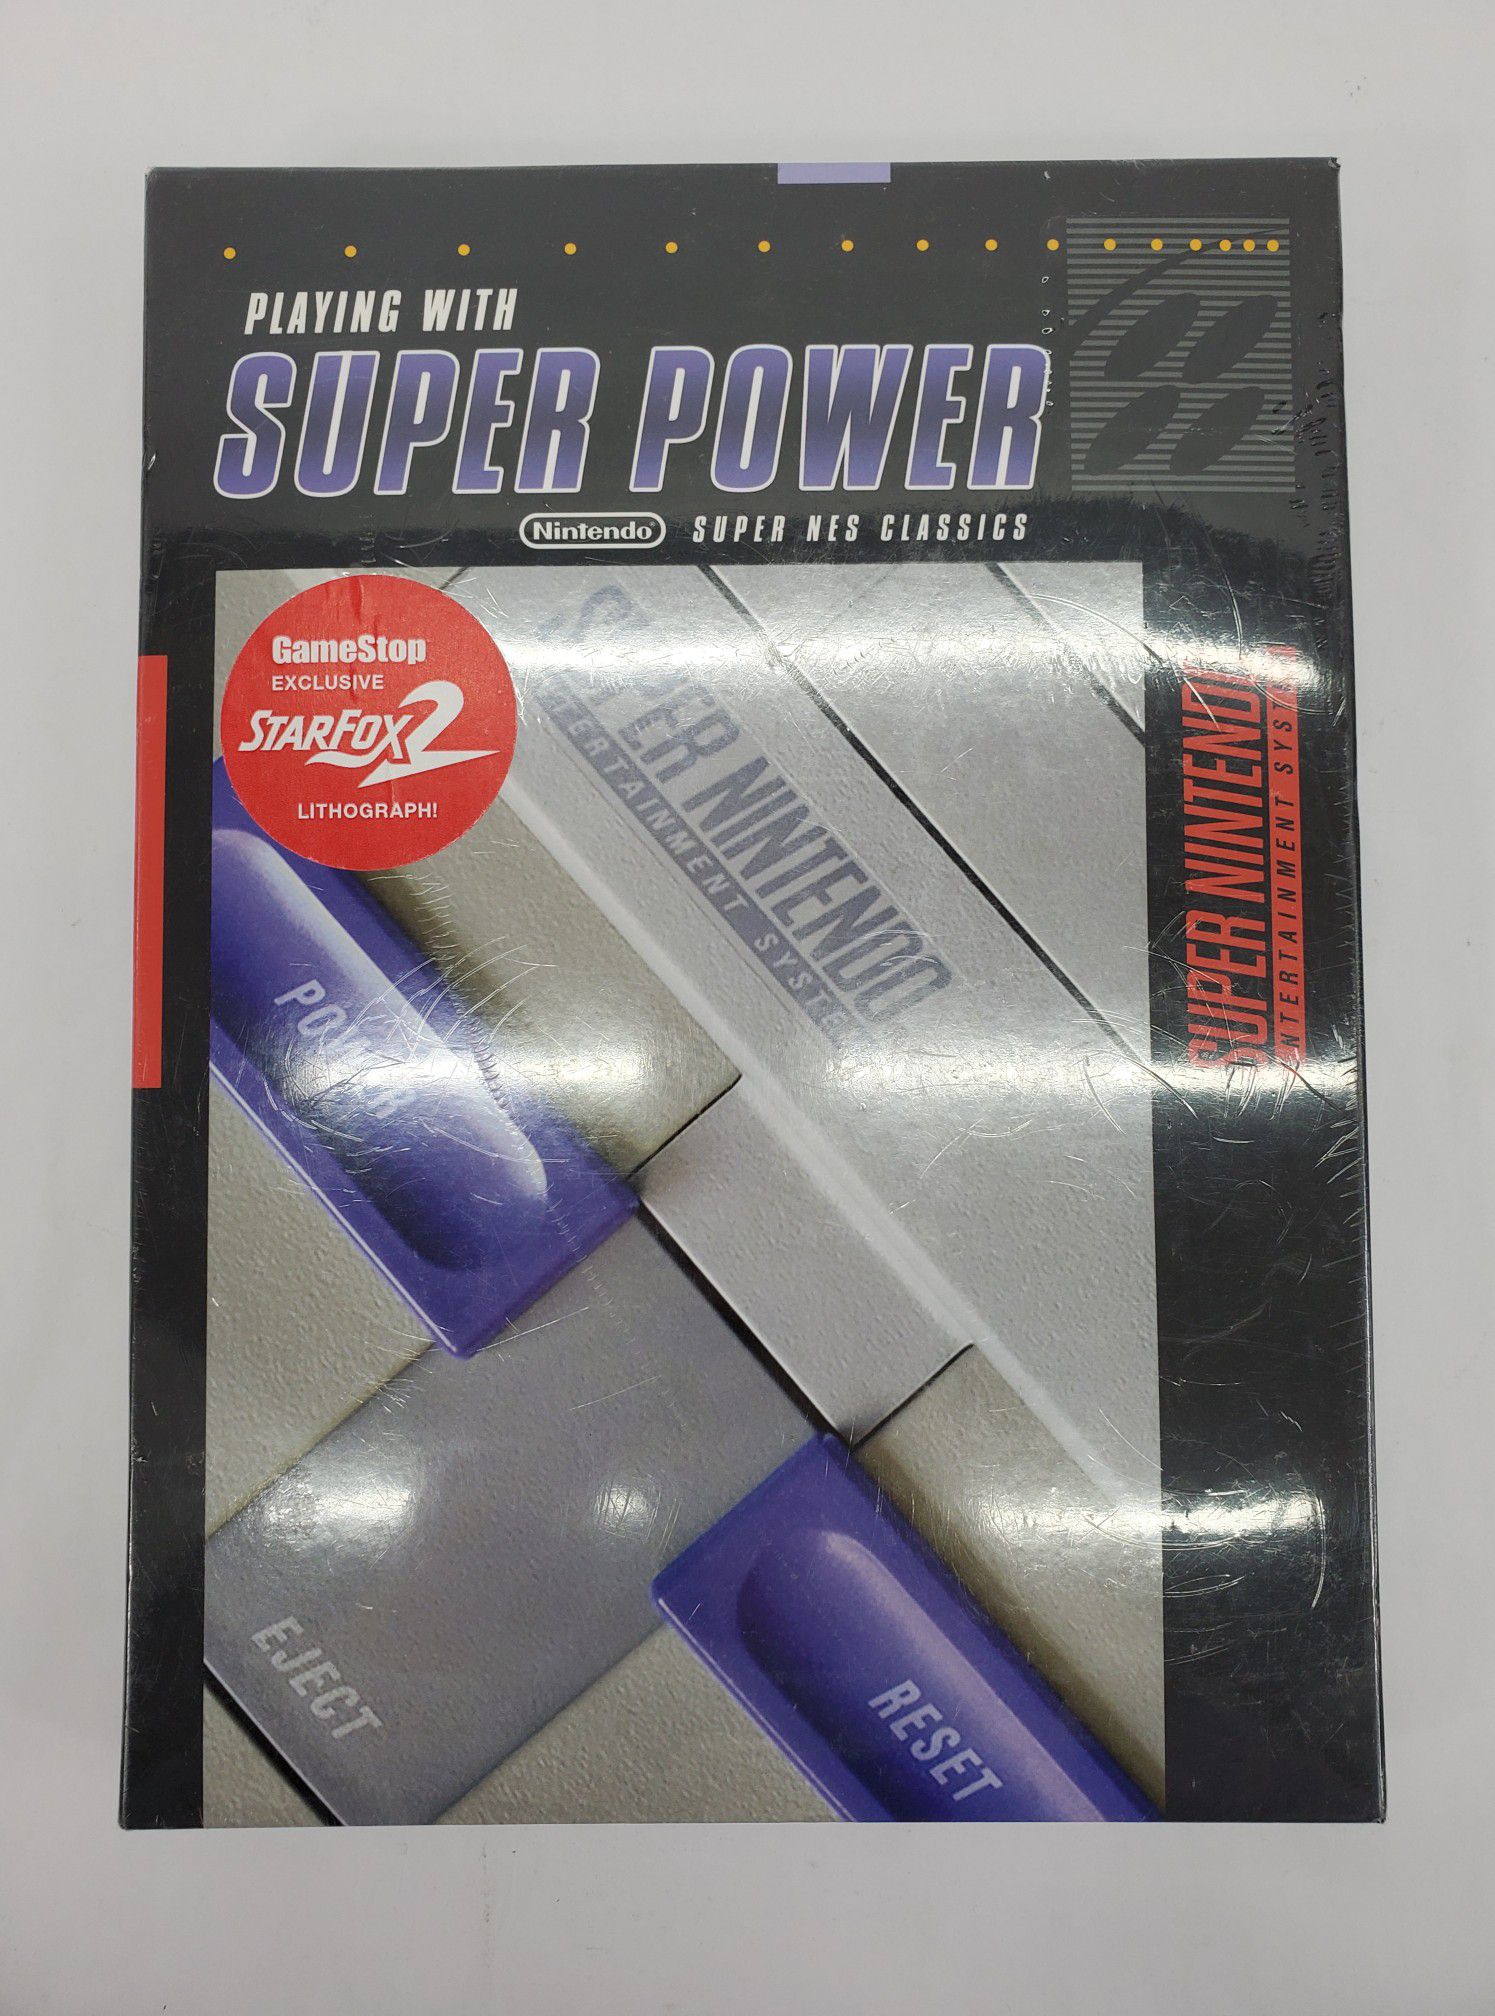 "Playing With Super Power" Nintendo Super NES Classics Prima Book - NEW!